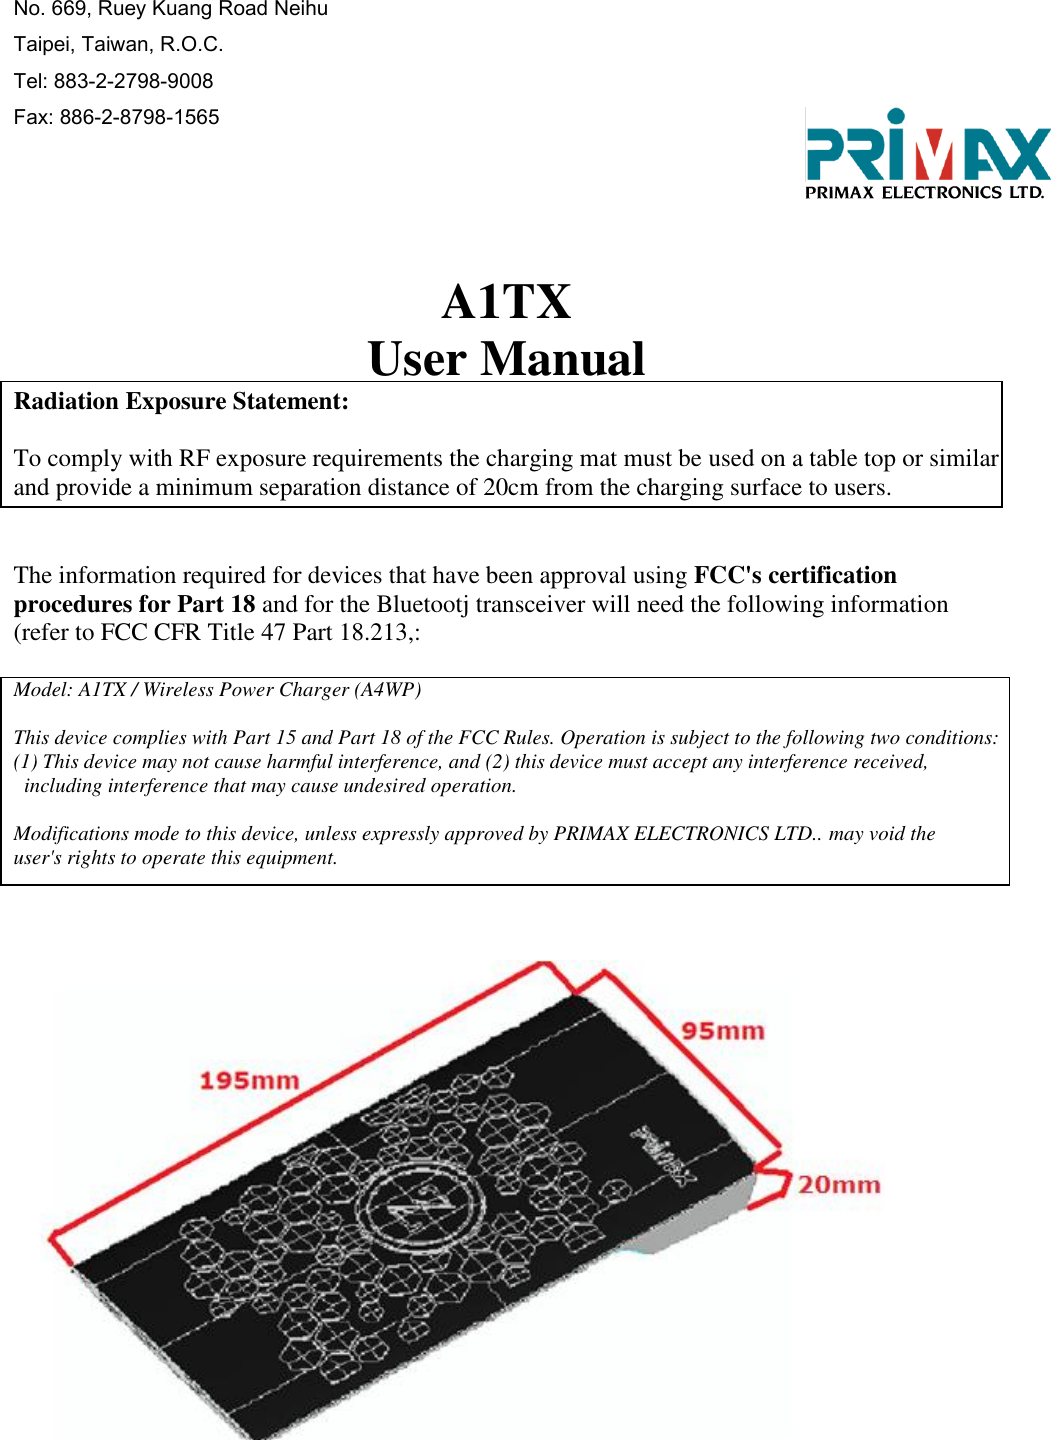 No. 669, Ruey Kuang Road Neihu Taipei, Taiwan, R.O.C. Tel: 883-2-2798-9008 Fax: 886-2-8798-1565      A1TX User Manual Radiation Exposure Statement:  To comply with RF exposure requirements the charging mat must be used on a table top or similar and provide a minimum separation distance of 20cm from the charging surface to users.   The information required for devices that have been approval using FCC&apos;s certification procedures for Part 18 and for the Bluetootj transceiver will need the following information (refer to FCC CFR Title 47 Part 18.213,:  Model: A1TX / Wireless Power Charger (A4WP)  This device complies with Part 15 and Part 18 of the FCC Rules. Operation is subject to the following two conditions: (1) This device may not cause harmful interference, and (2) this device must accept any interference received,   including interference that may cause undesired operation.  Modifications mode to this device, unless expressly approved by PRIMAX ELECTRONICS LTD.. may void the   user&apos;s rights to operate this equipment.            